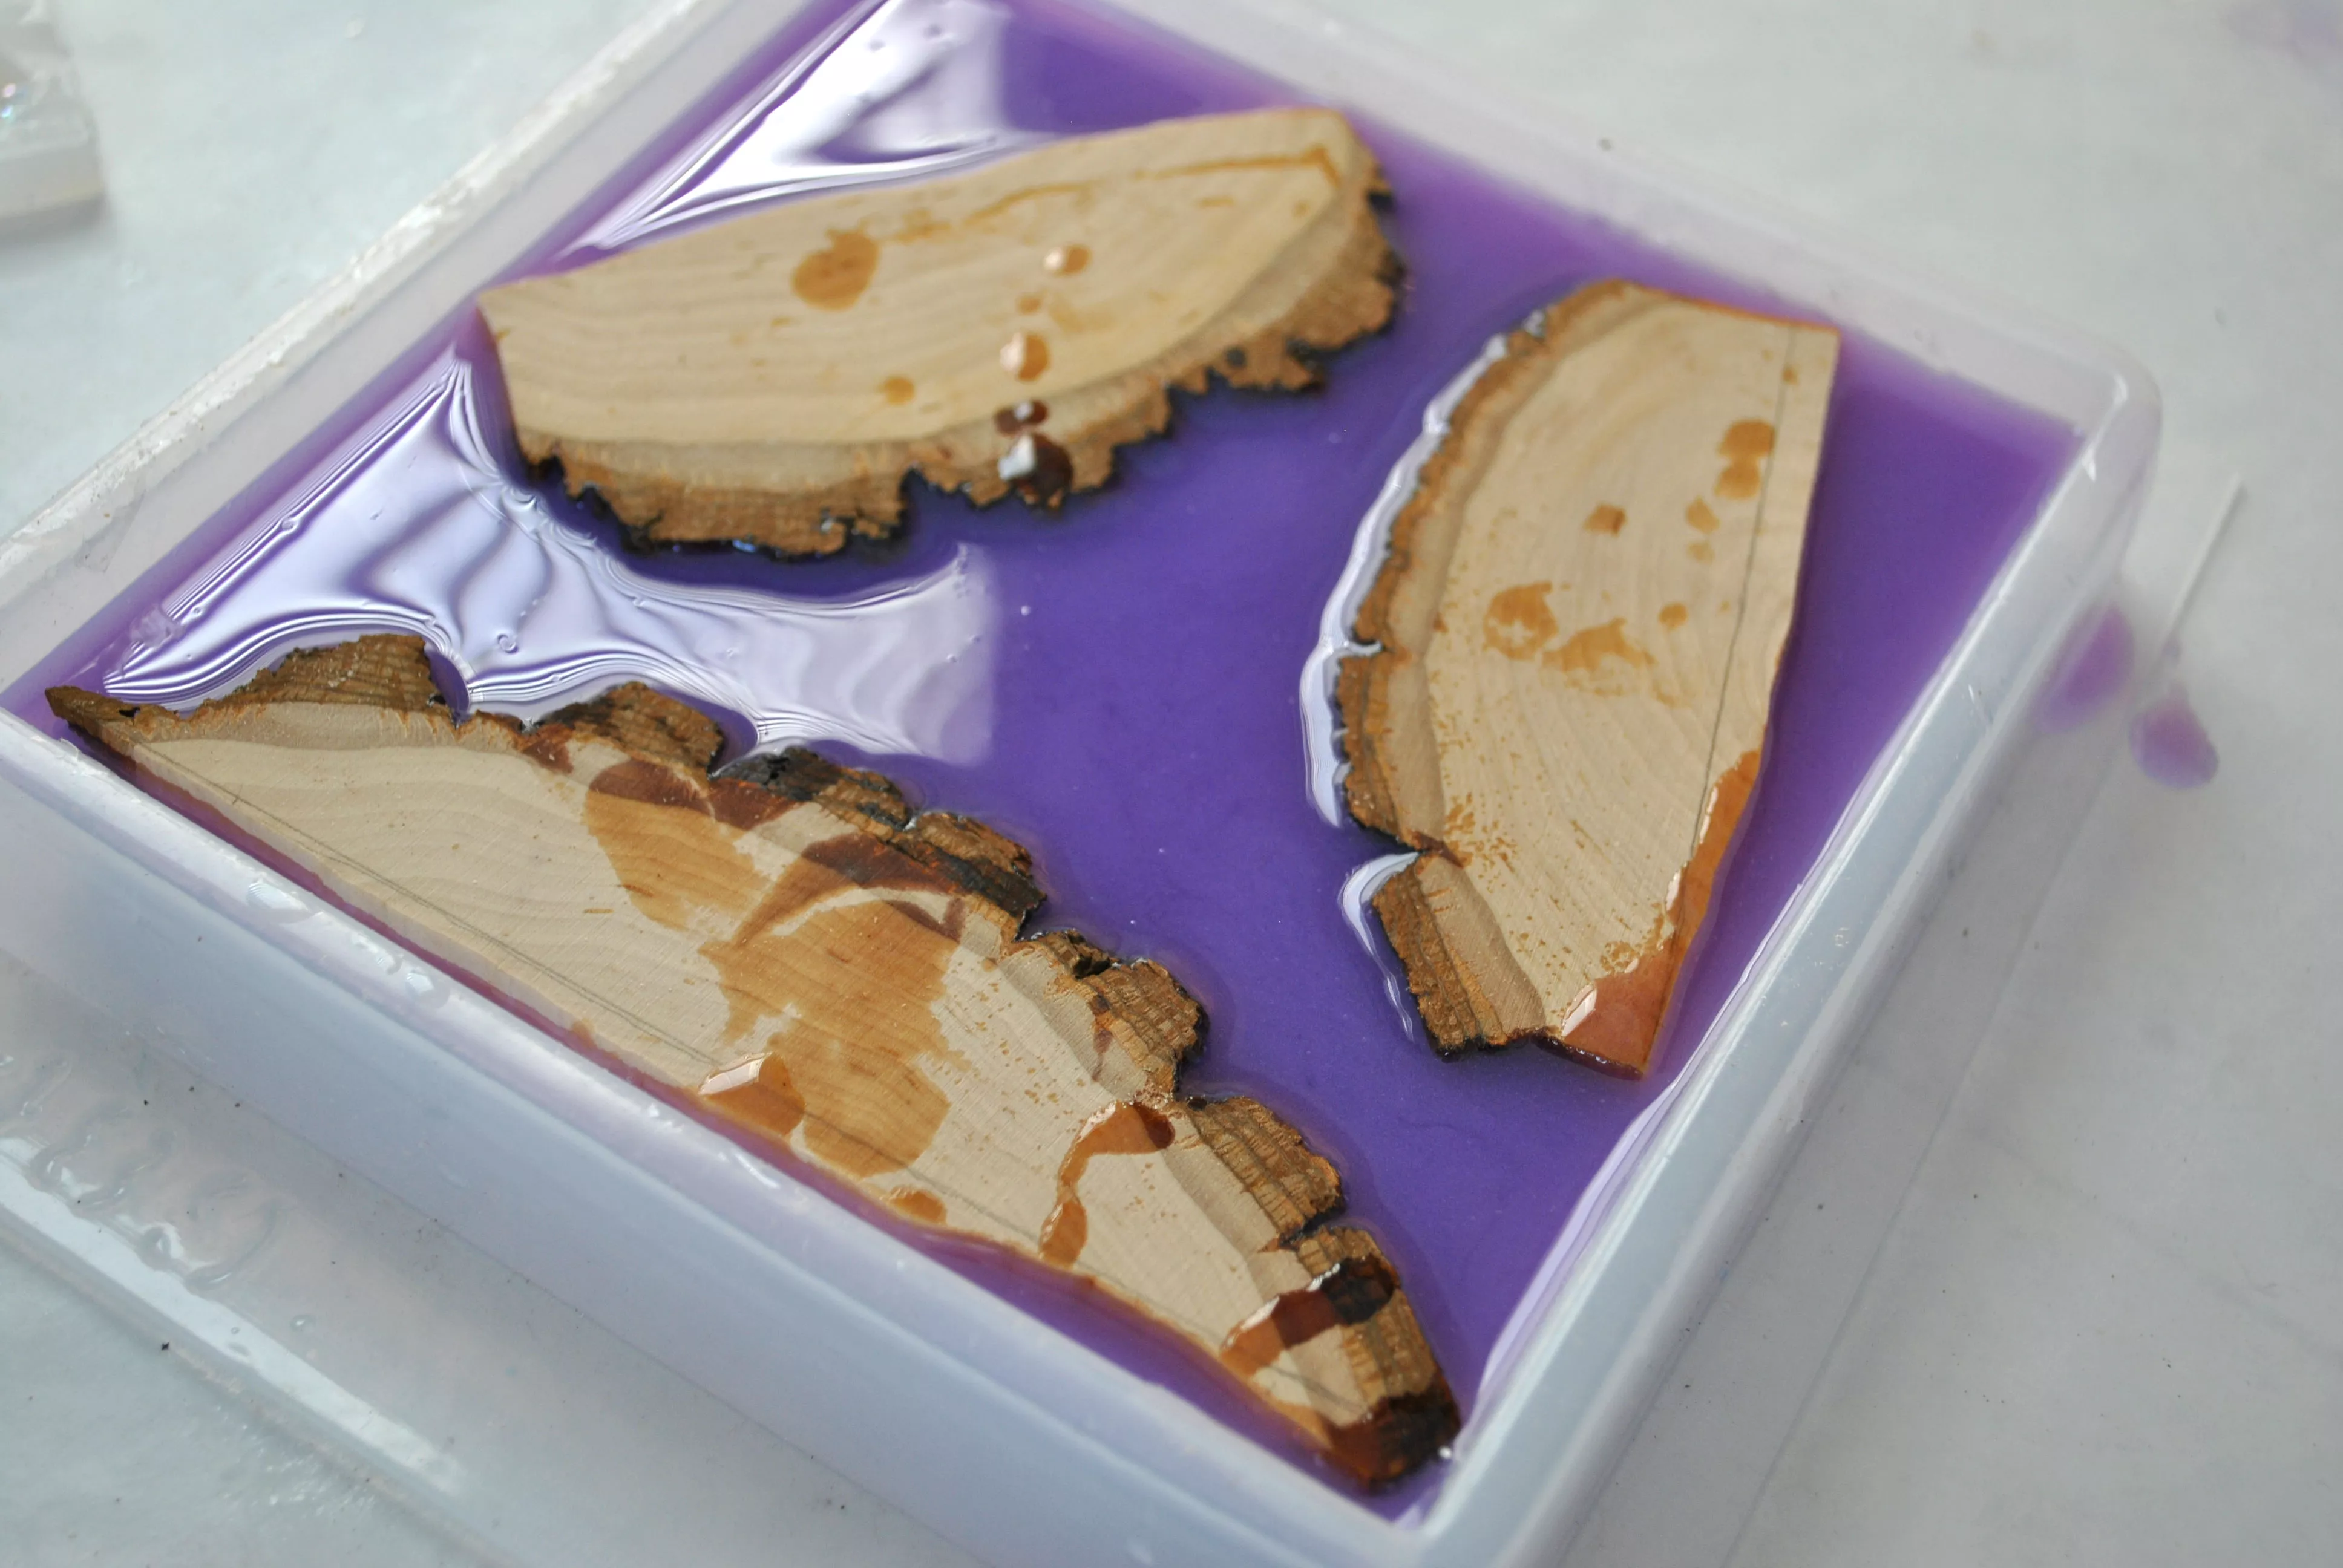 three cuts of wood and lavender resin mixture in square resin mold